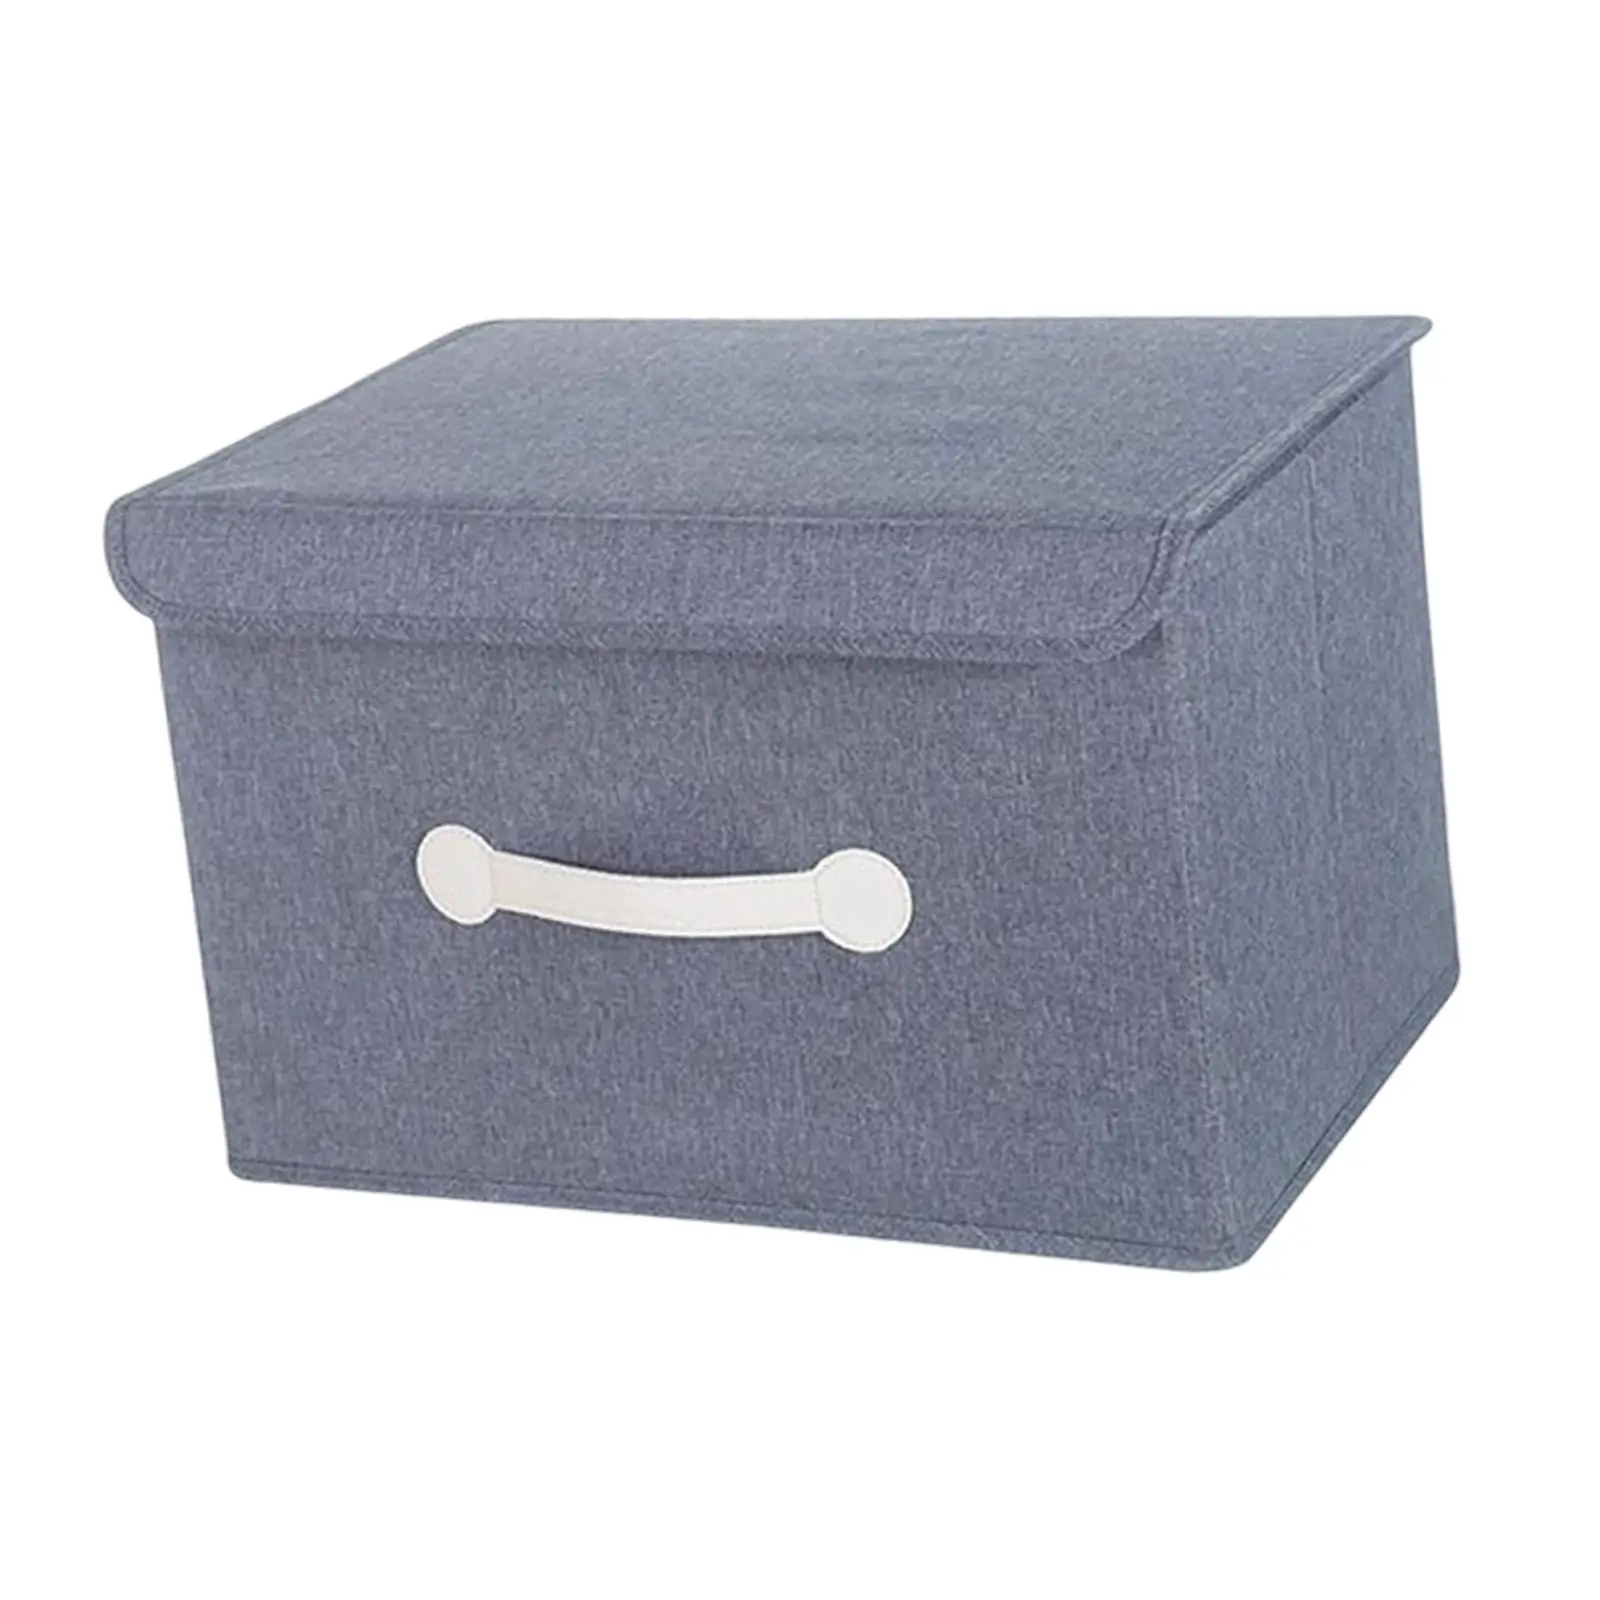 Clothes Storage Bag Large Capacity with Lid Foldable Storage Box for Shoes